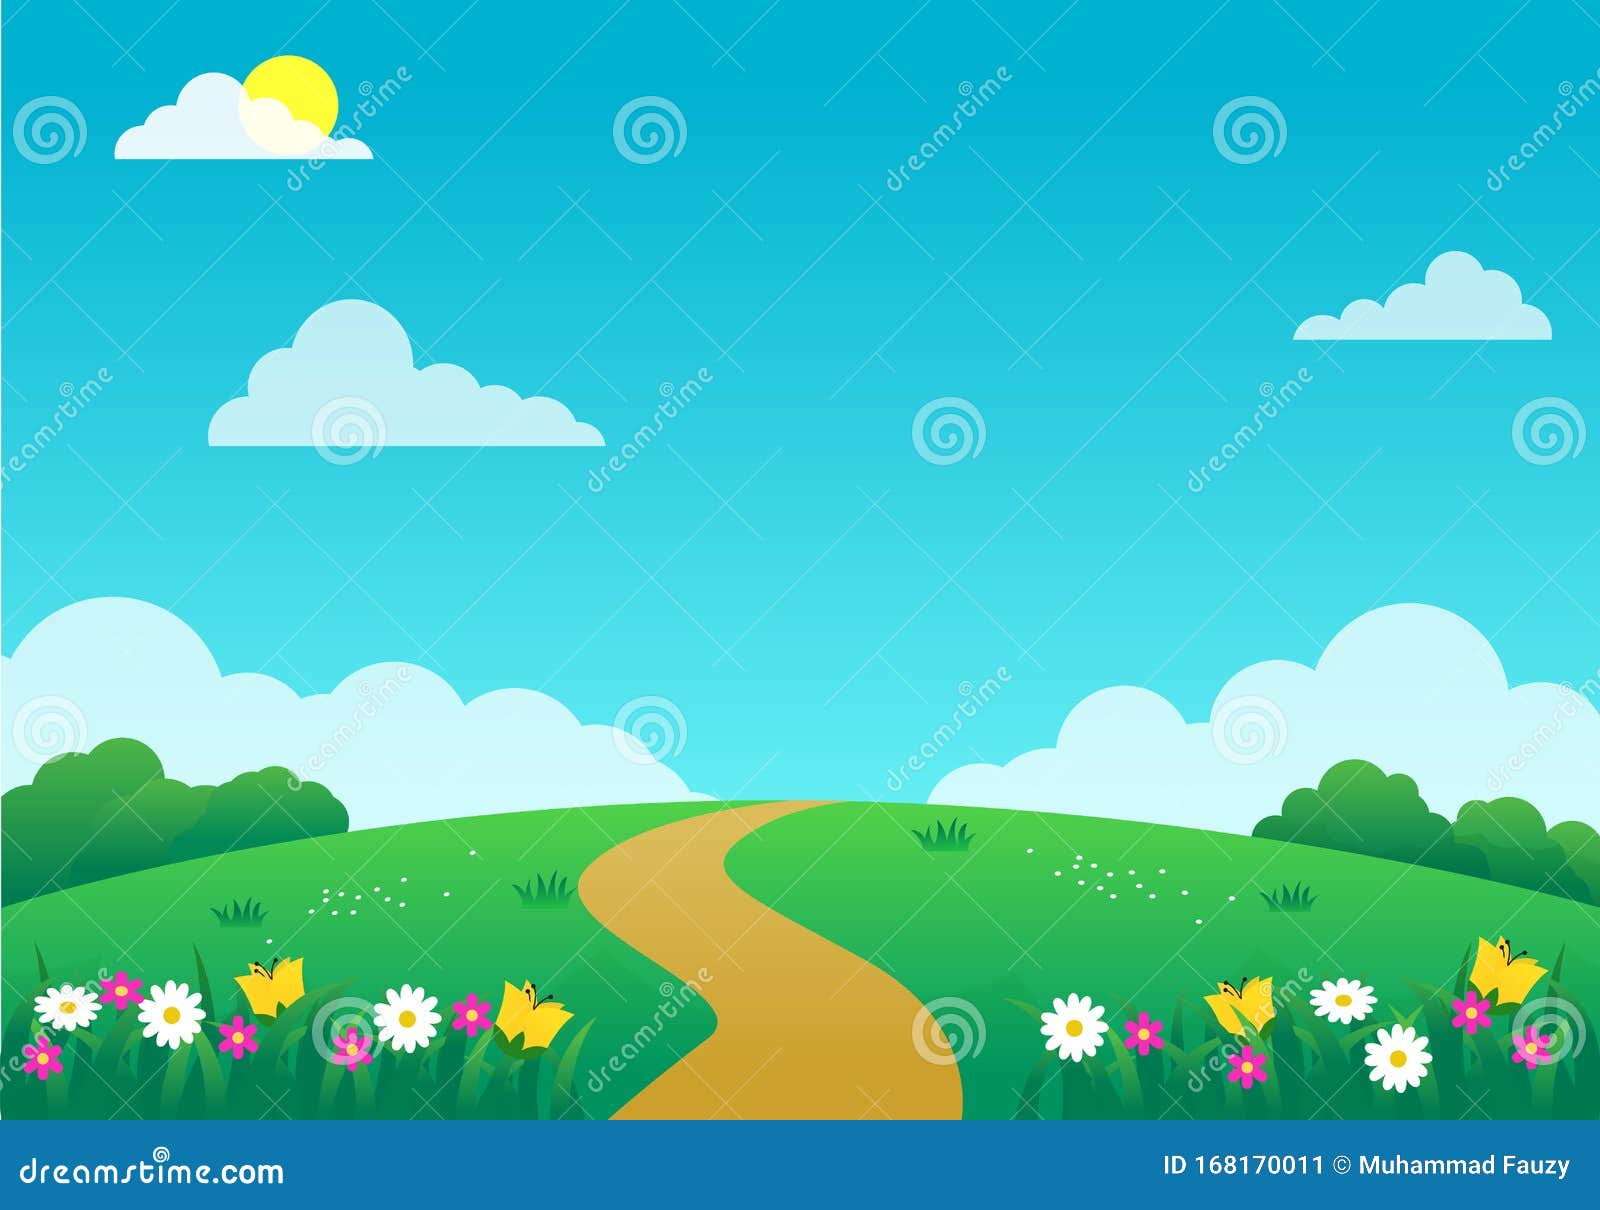 Beautiful Nature Landscape Cartoon Illustration with Flowers, Green Grass  and Blue Sky Stock Vector - Illustration of countryside, land: 168170011